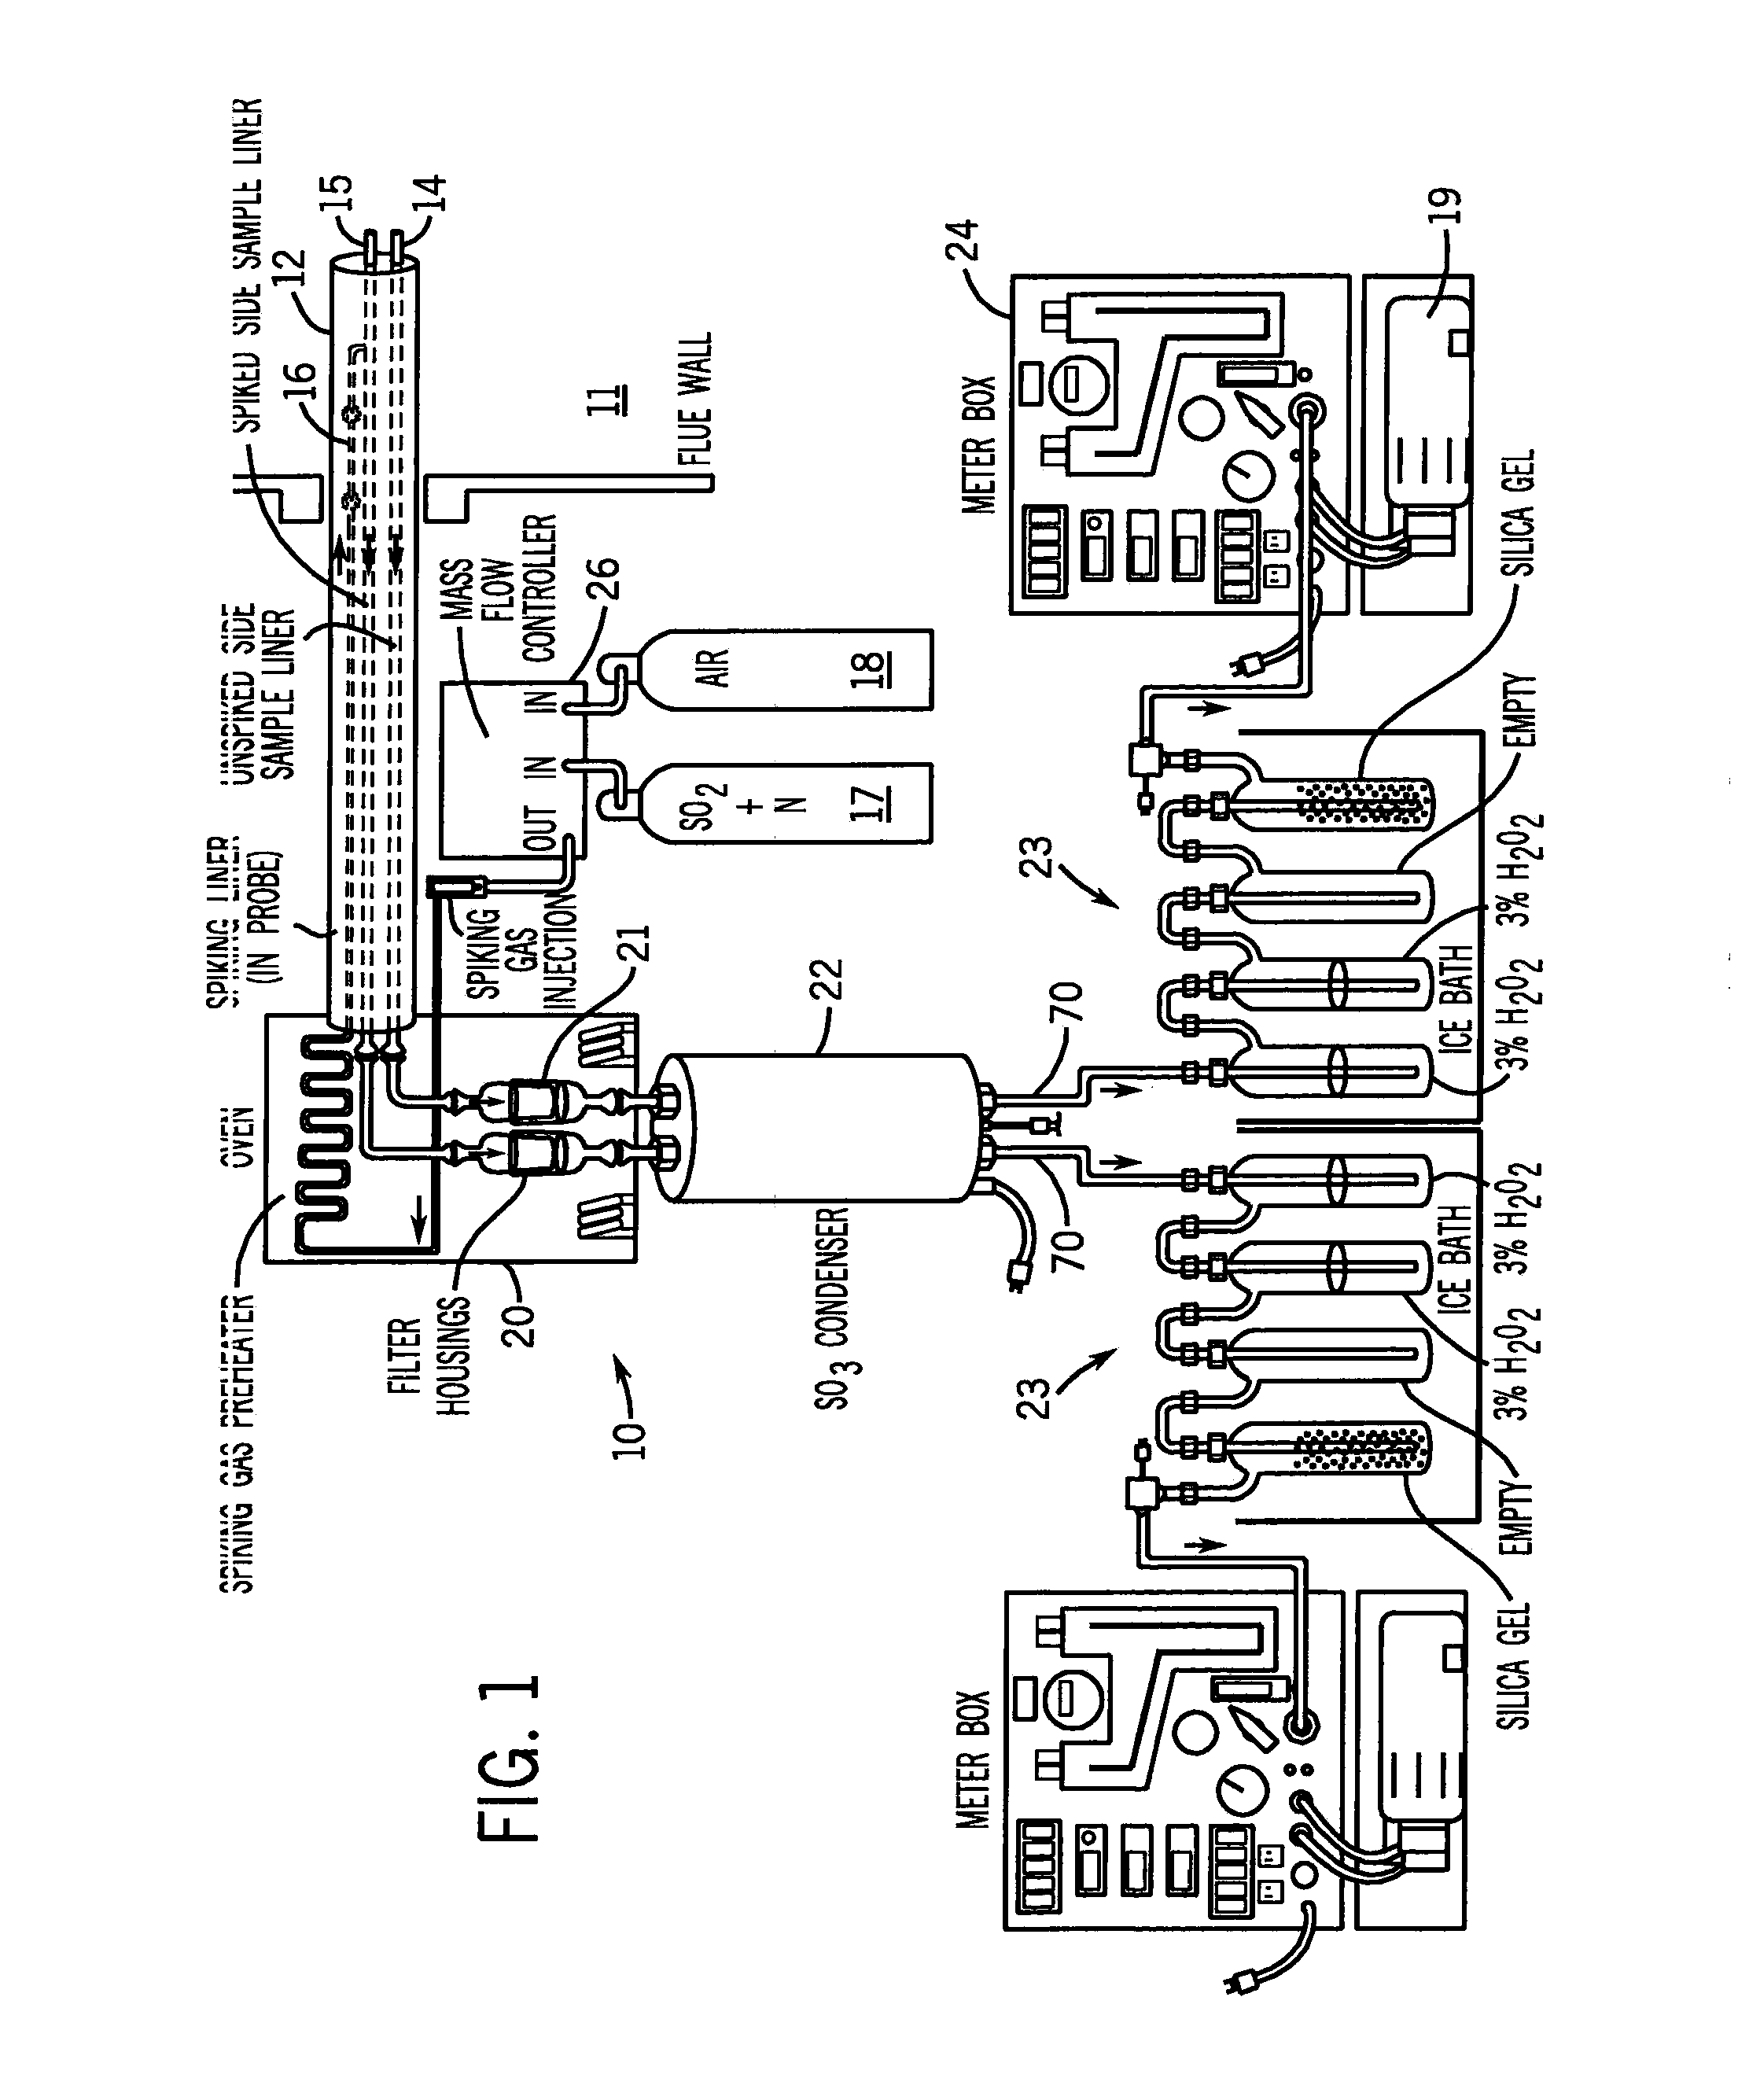 Flue Gas Monitoring And Dynamic Spiking For Sulfur Trioxide/Sulfuric Acid